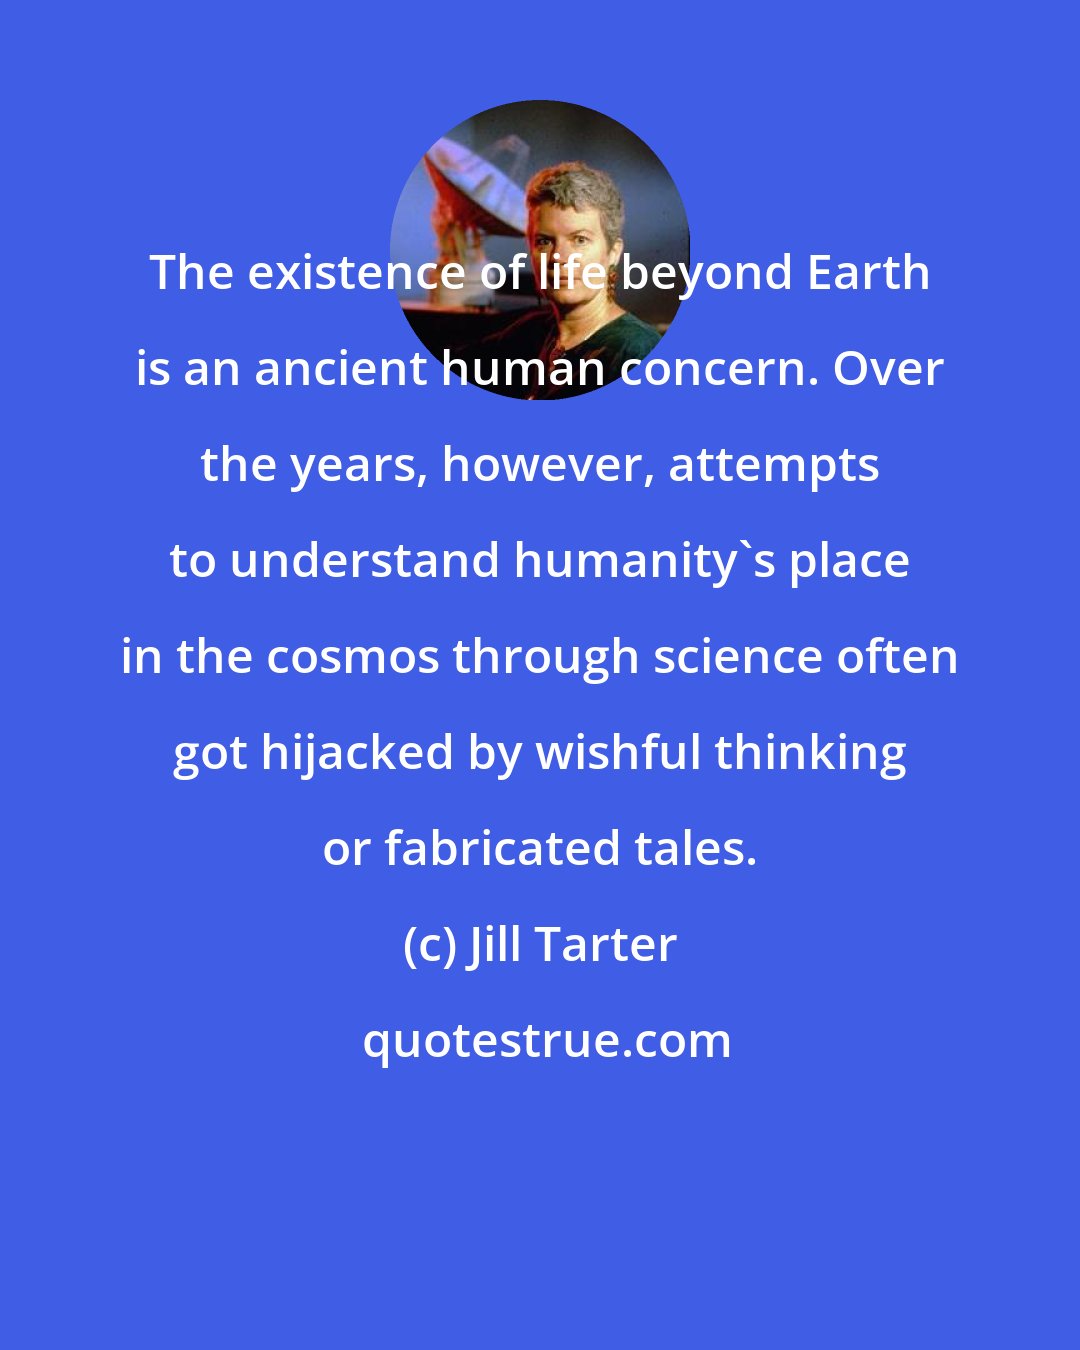 Jill Tarter: The existence of life beyond Earth is an ancient human concern. Over the years, however, attempts to understand humanity's place in the cosmos through science often got hijacked by wishful thinking or fabricated tales.